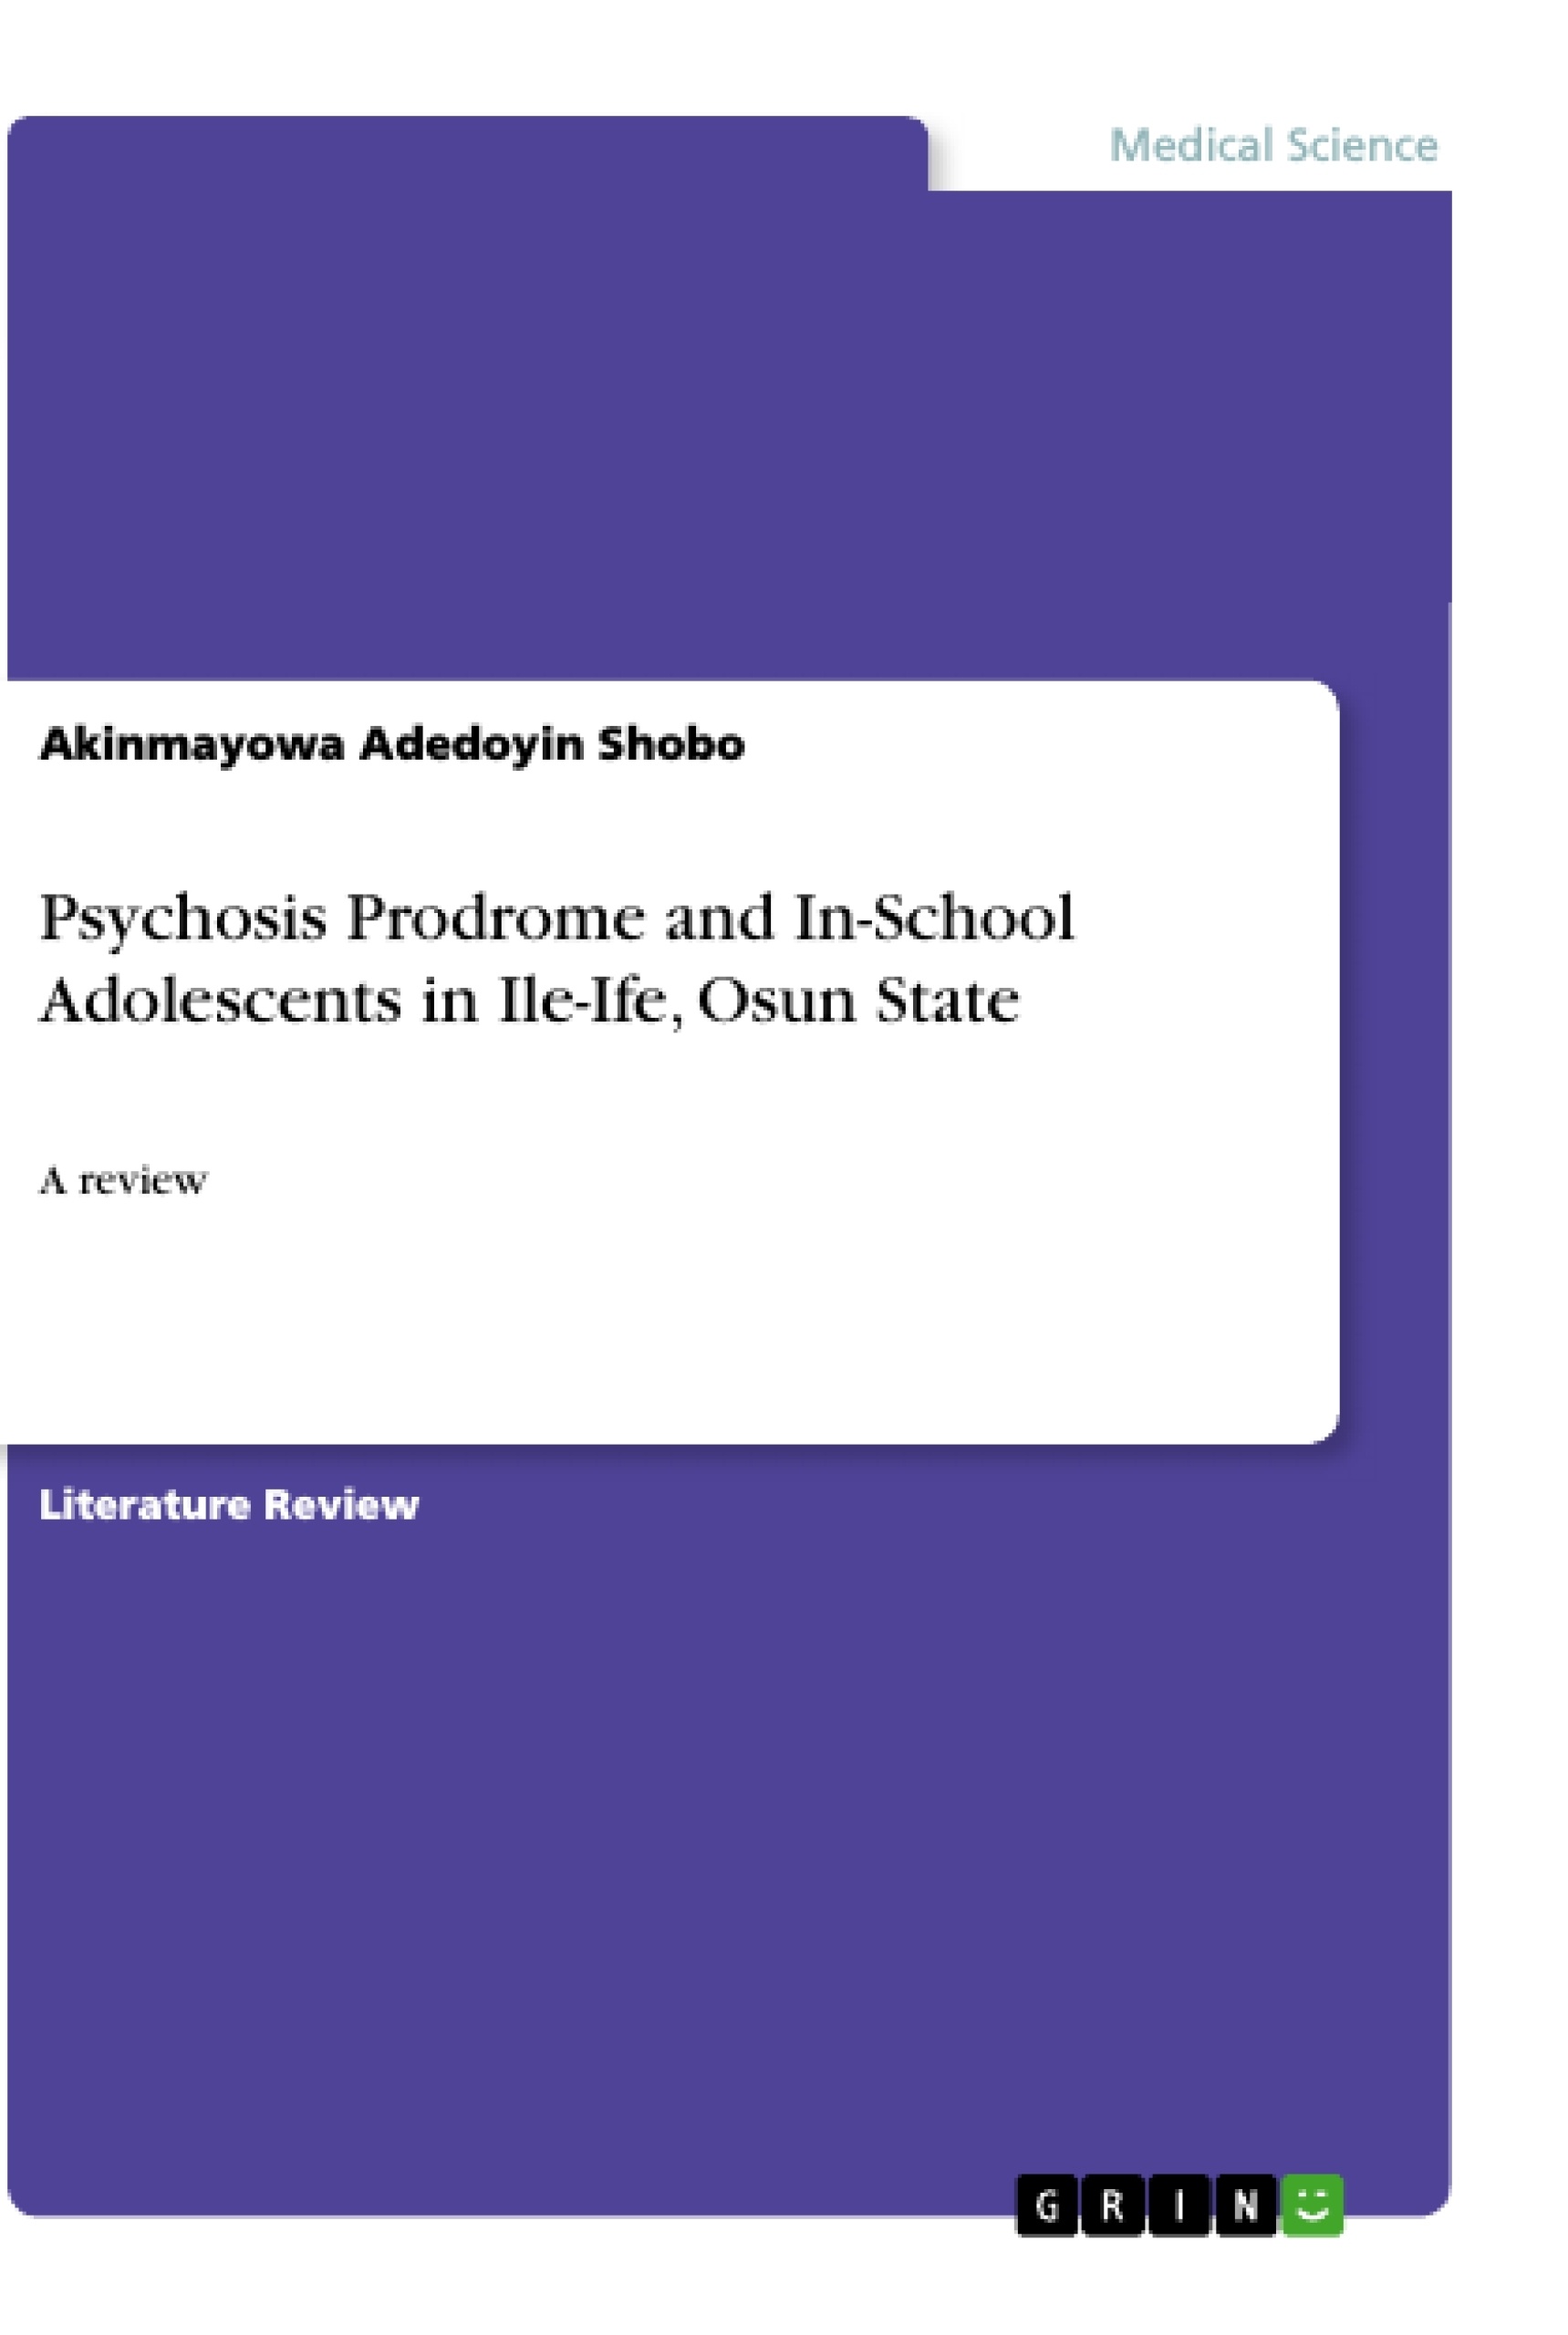 Title: Psychosis Prodrome and In-School Adolescents in Ile-Ife, Osun State